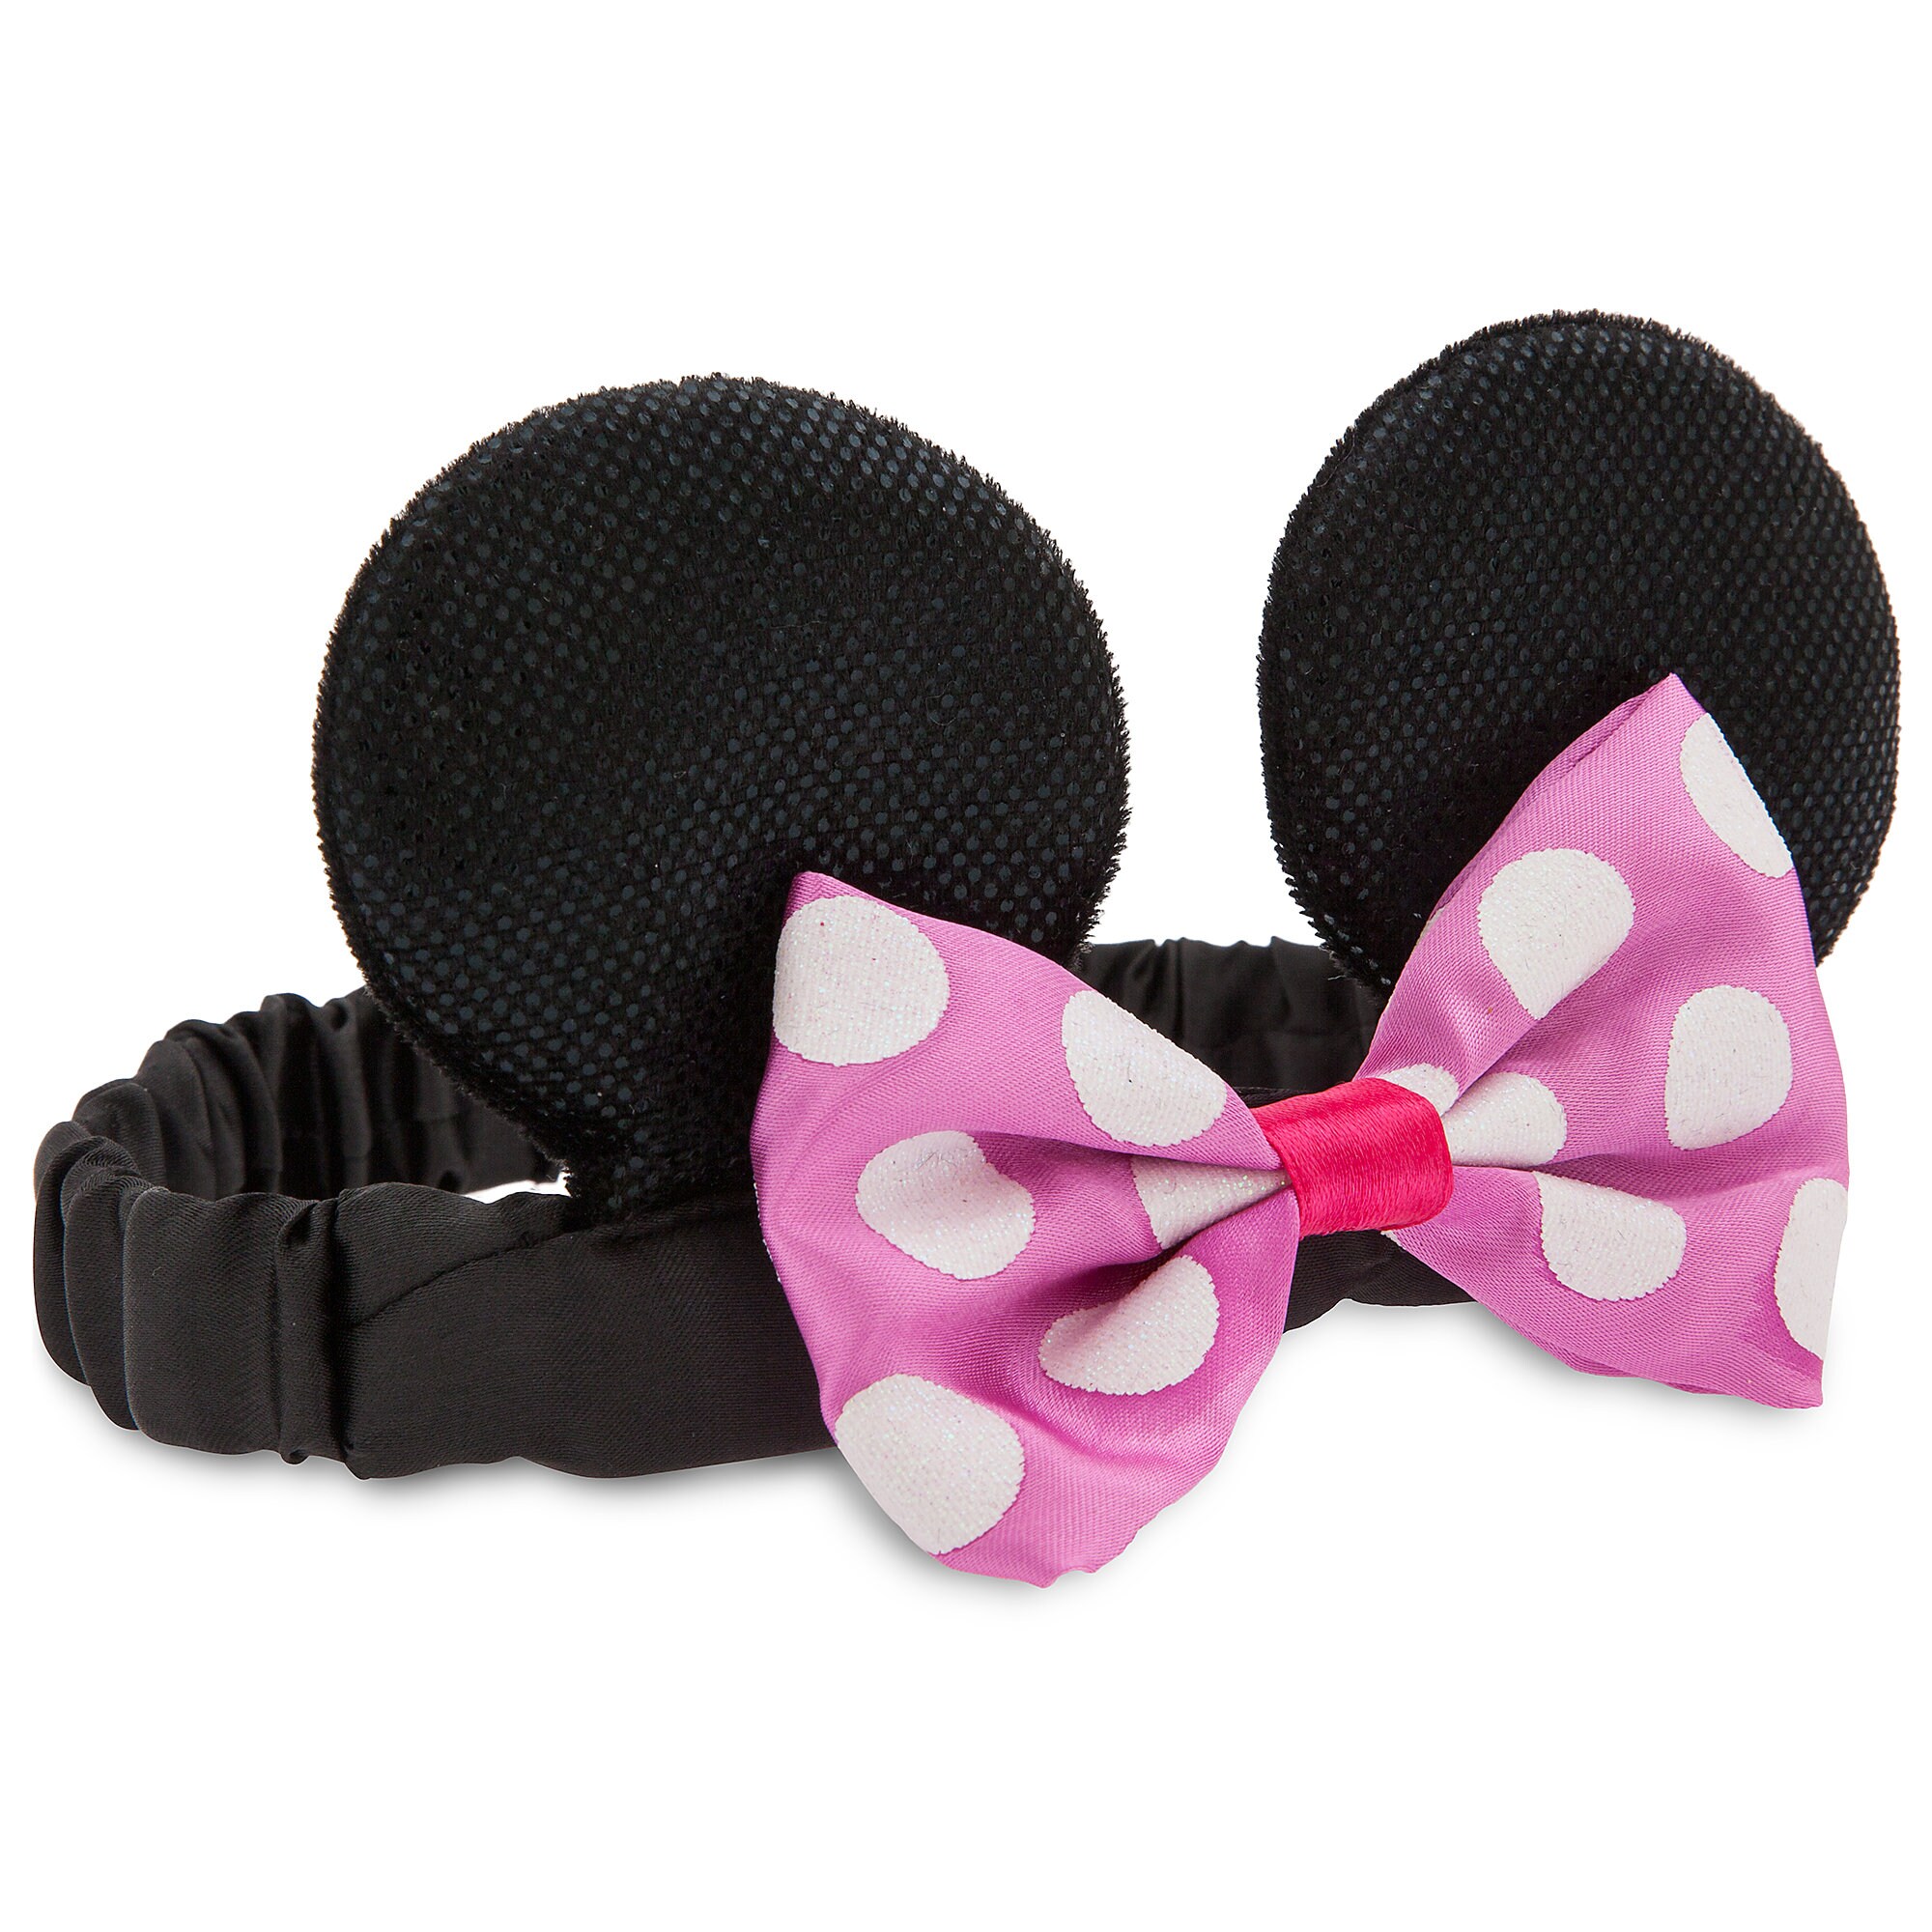 Minnie Mouse Ear Headband for Baby - Pink